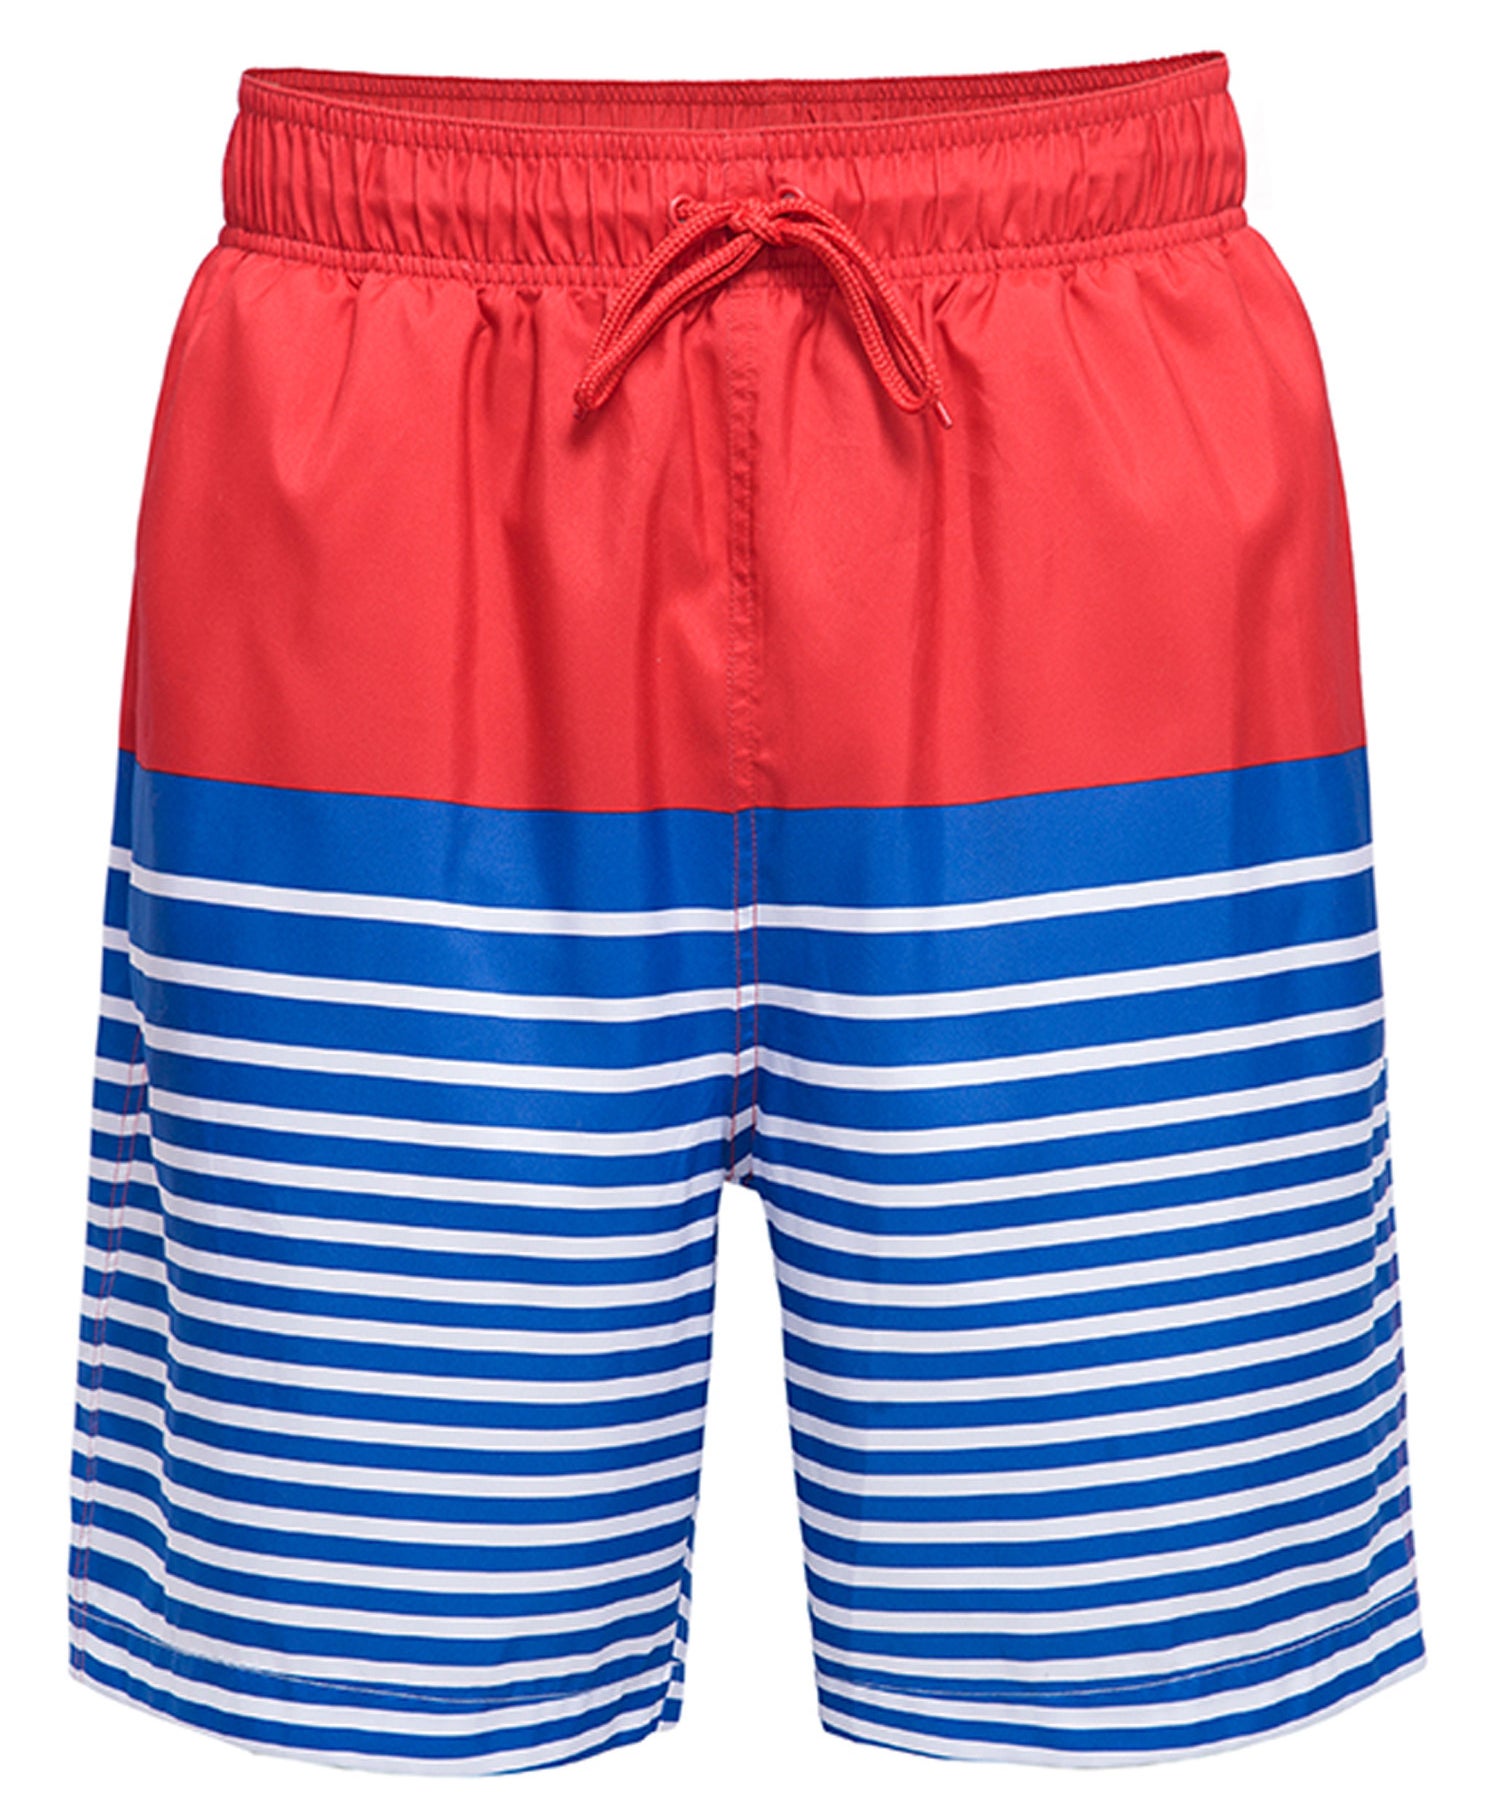 An image of a pair of men&#x27;s swim shorts with a nautical-inspired print